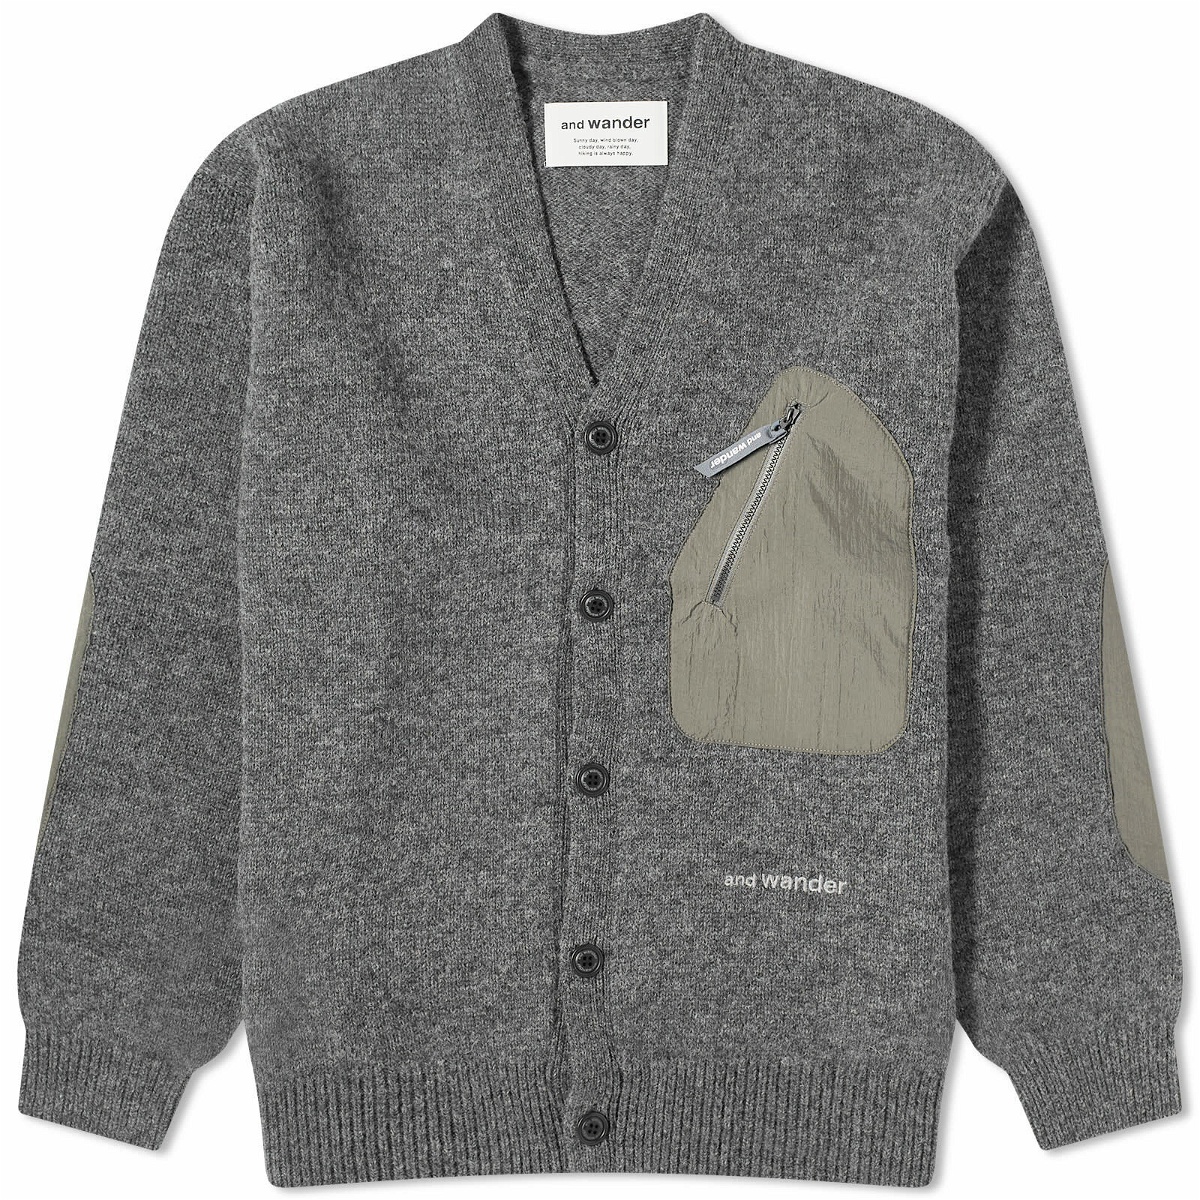 And Wander Men's Shetland Wool Knit Cardigan in Grey and Wander